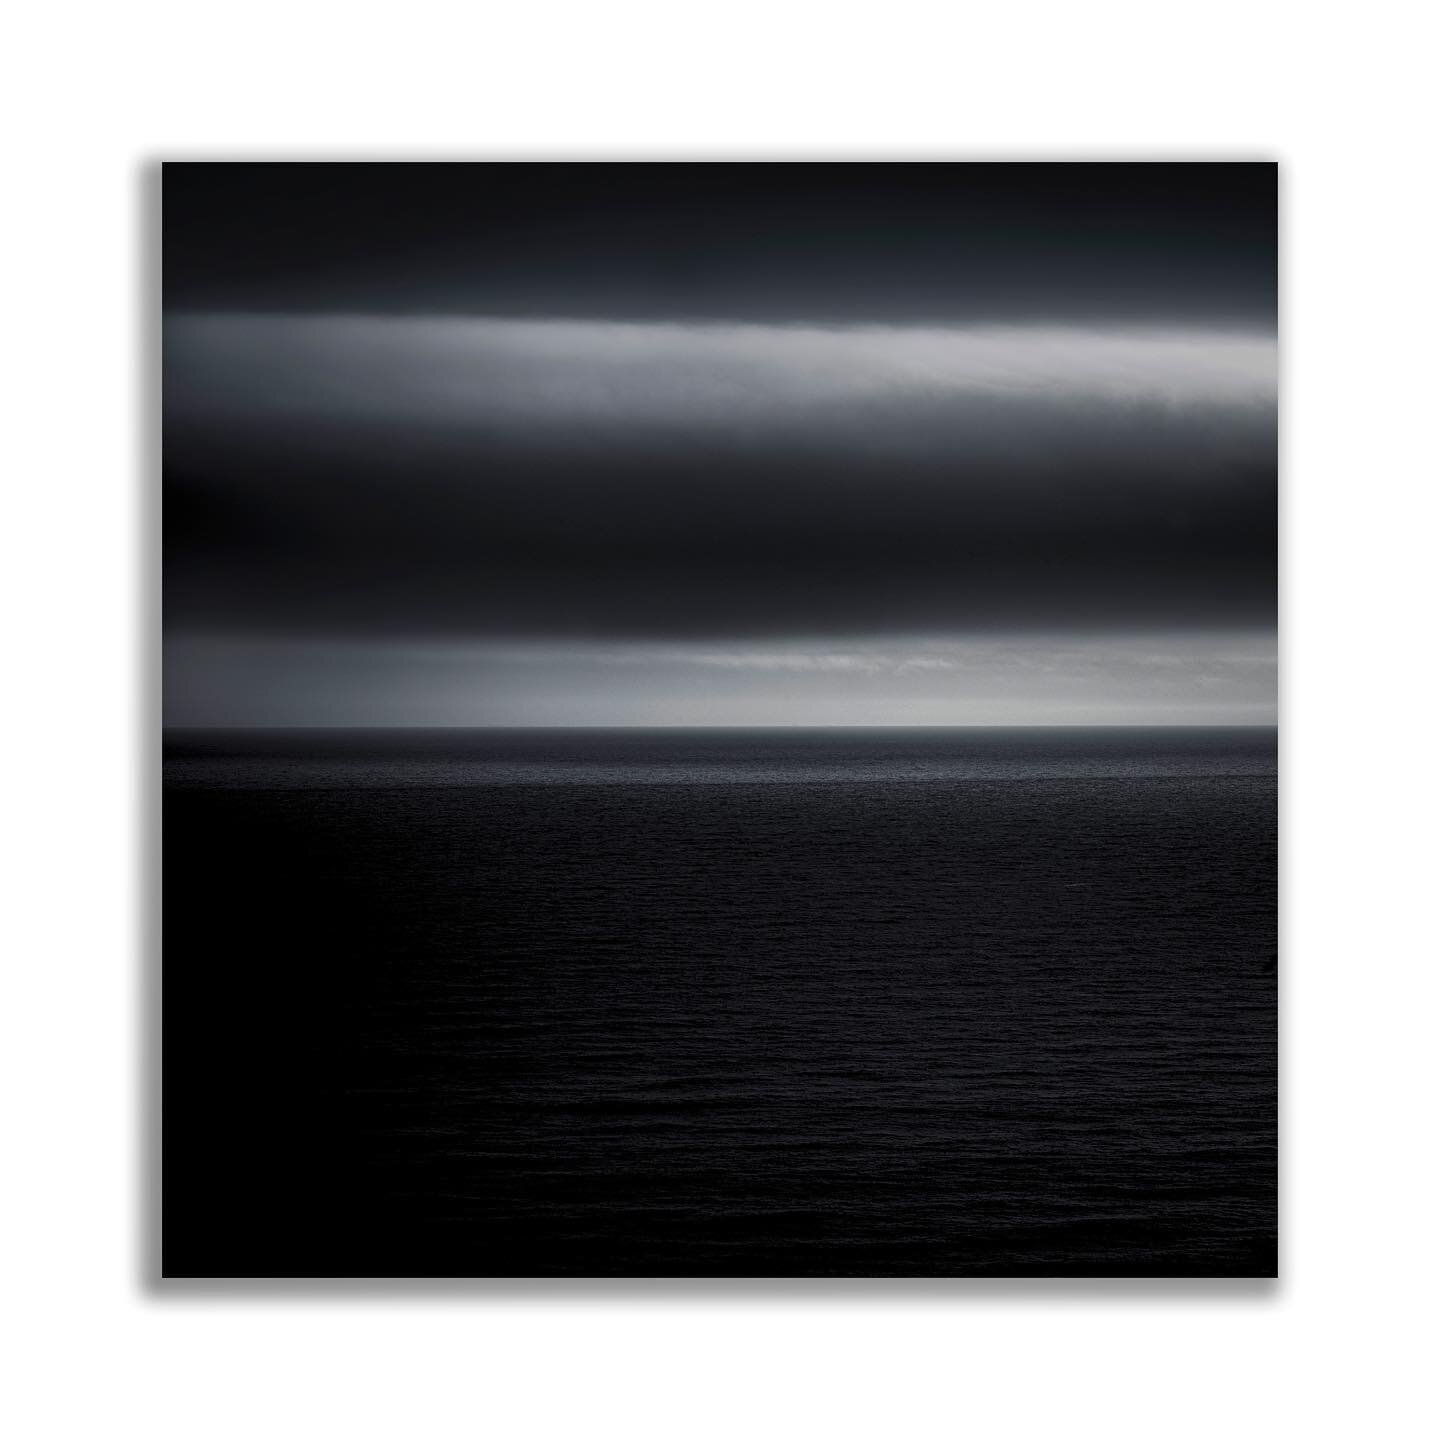 New image from &lsquo;In Dark Seas&rsquo; series &hellip;..
.
.
.
.
#seascapephotography #darksea #fineartprint #fineartphotography #darkseascape #cloudformation #abstraction #abstractioninnature #minimalistseascape #artphoto #photohastings #southcoa